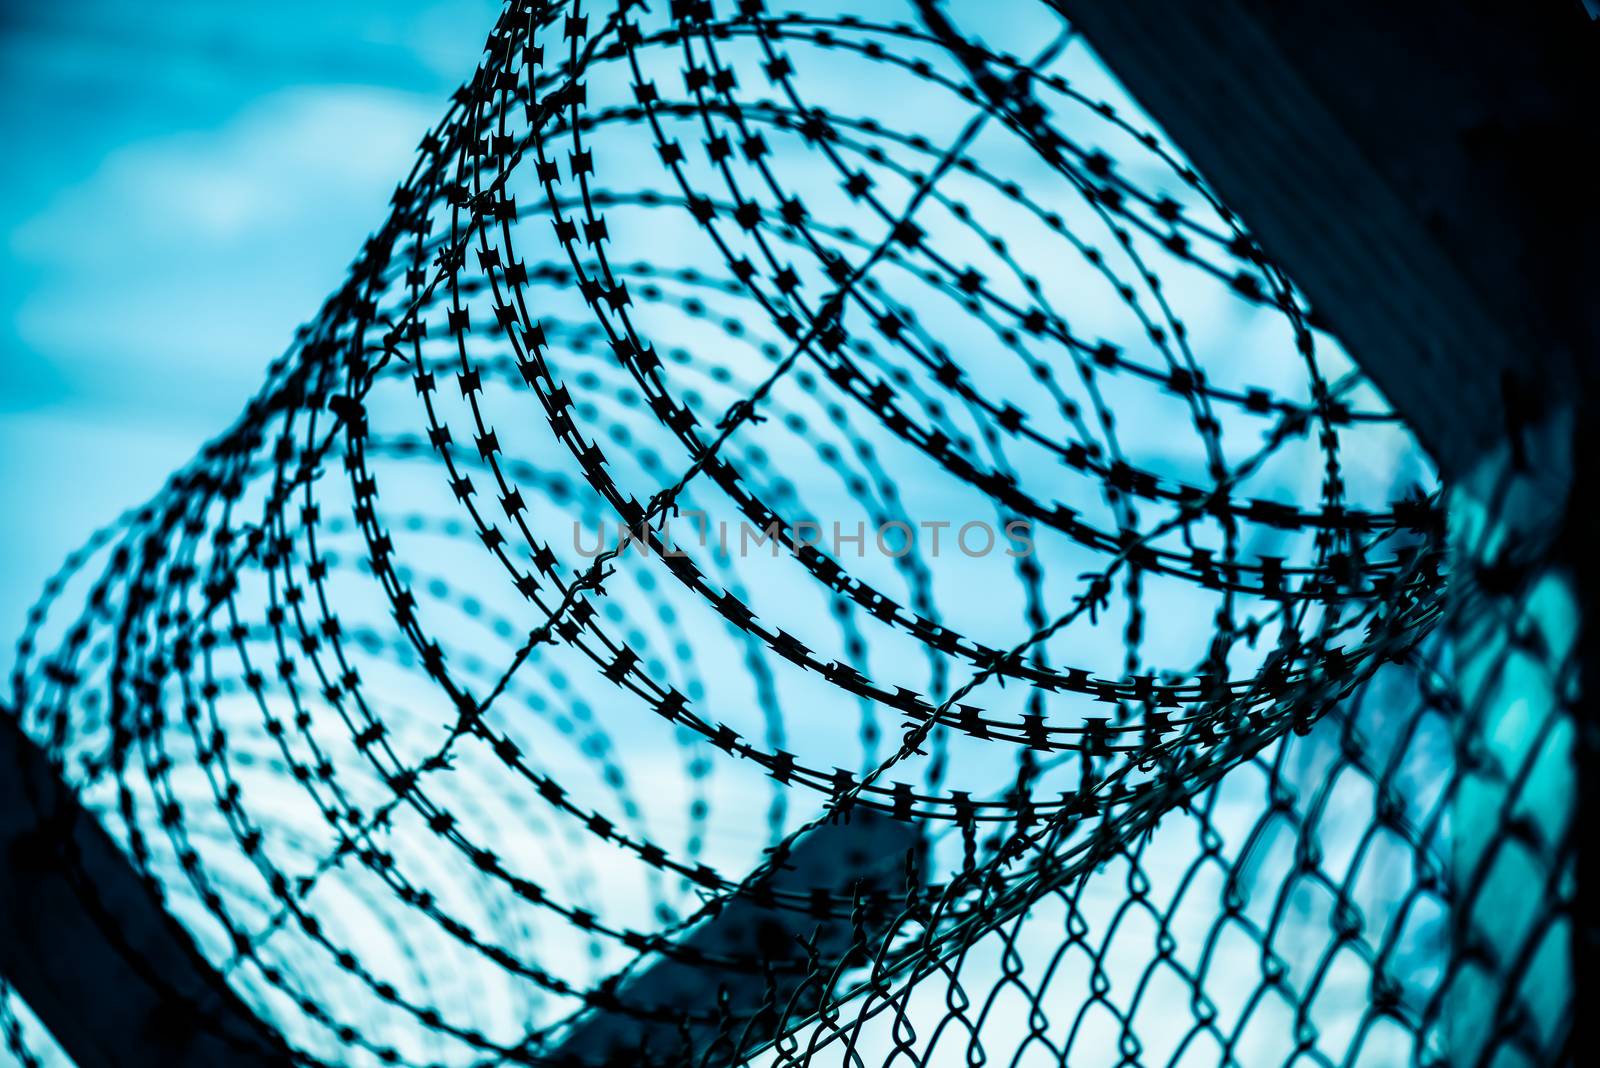 Closeup a security fence with barbed wire. Human Rights and social justice abstract concept.